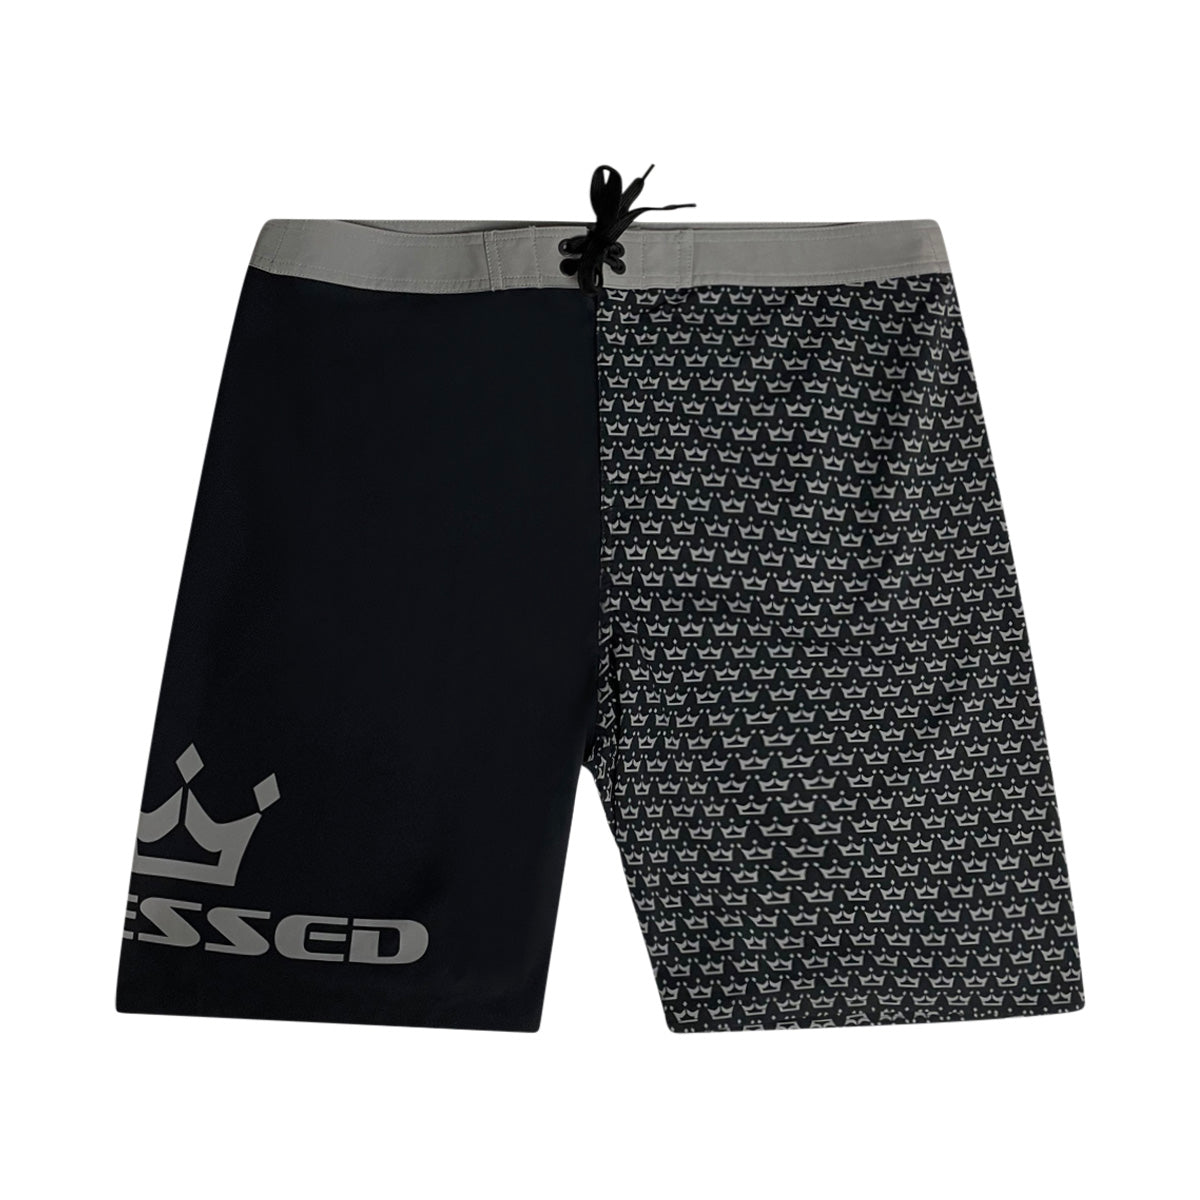 Blessed Surf Shorts